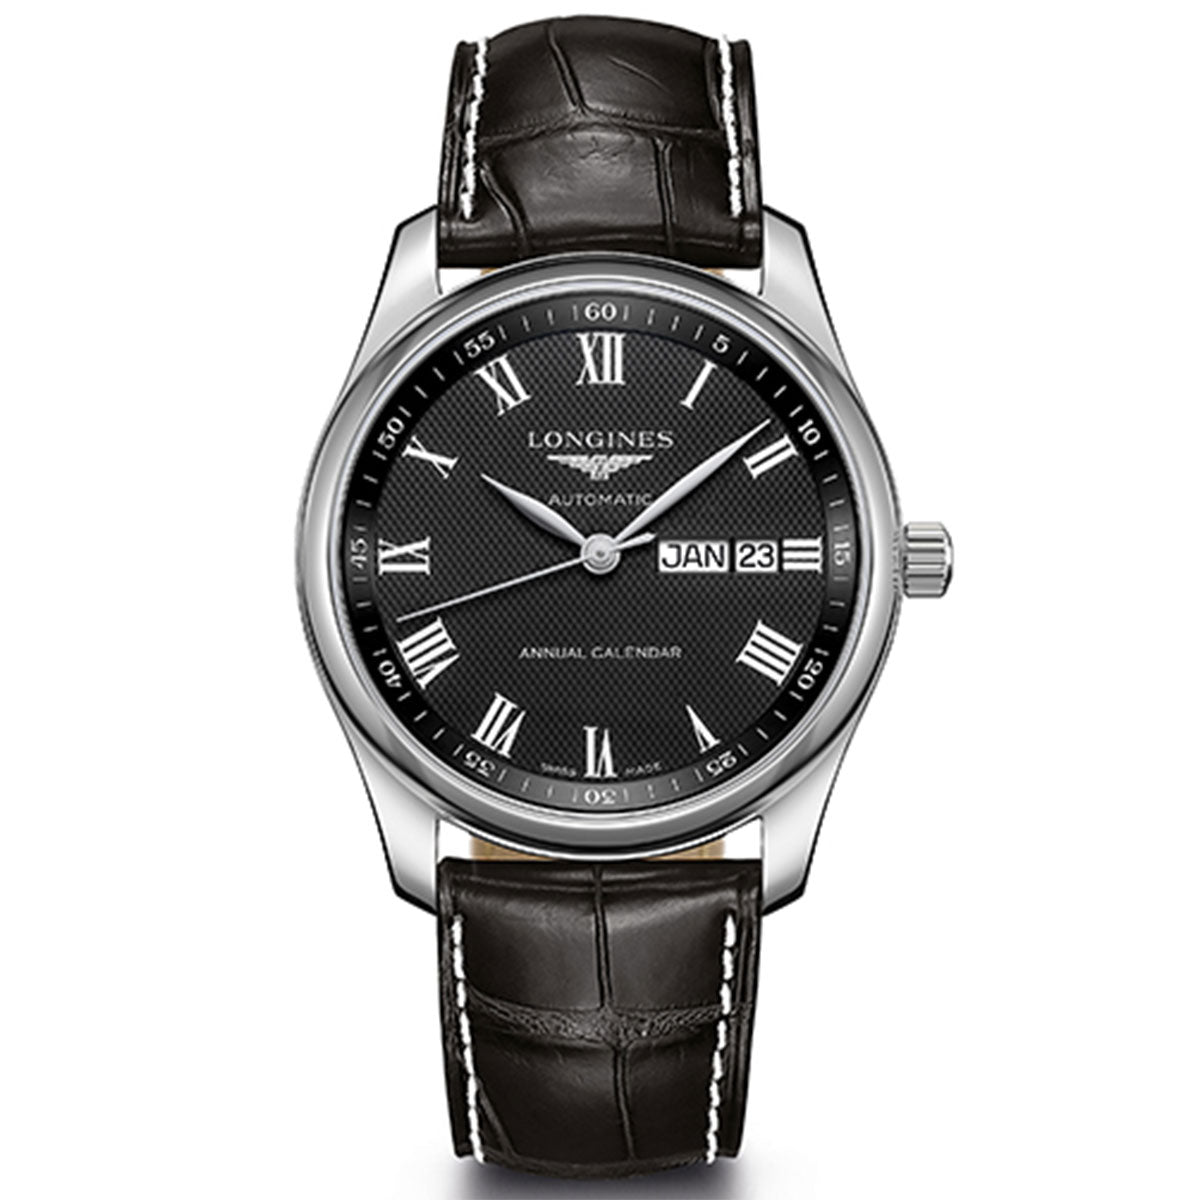 Longines Master Collection Automatic Annual Calendar 40mm Watch